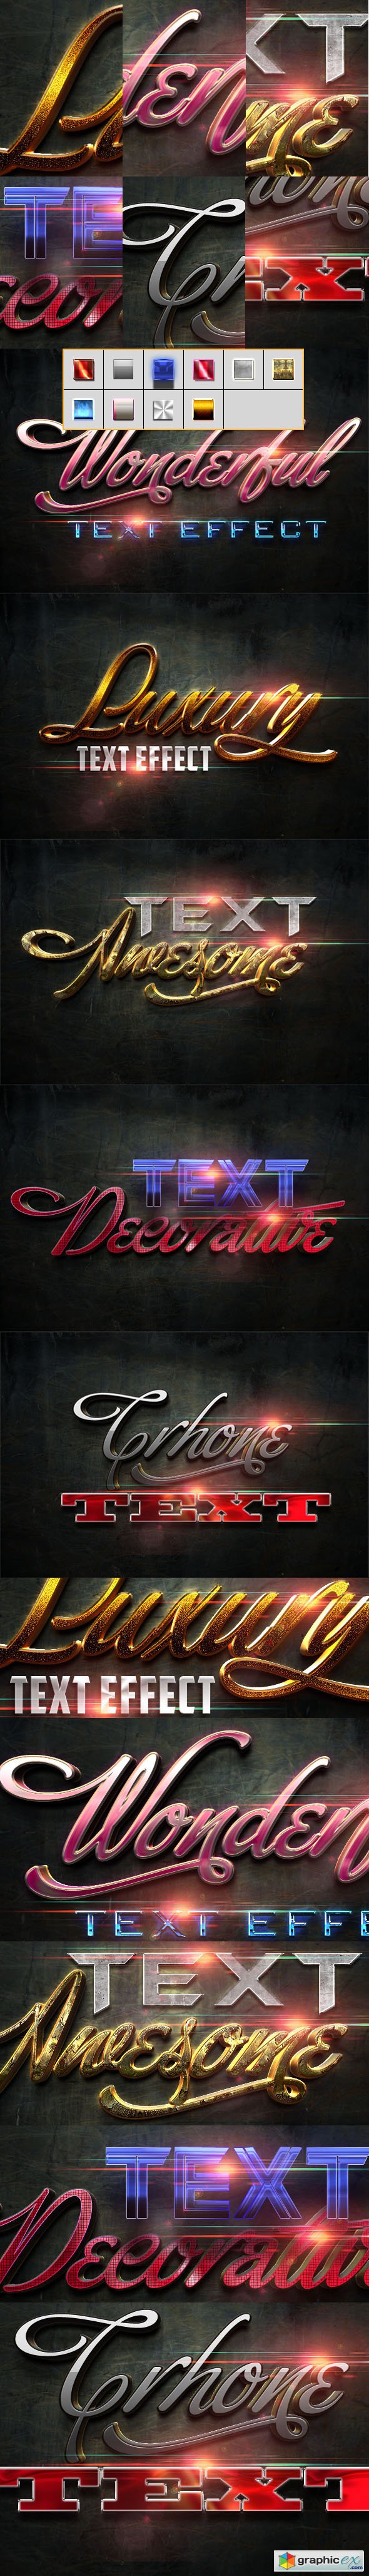 Graphicriver 10 Modern Text Styles 002